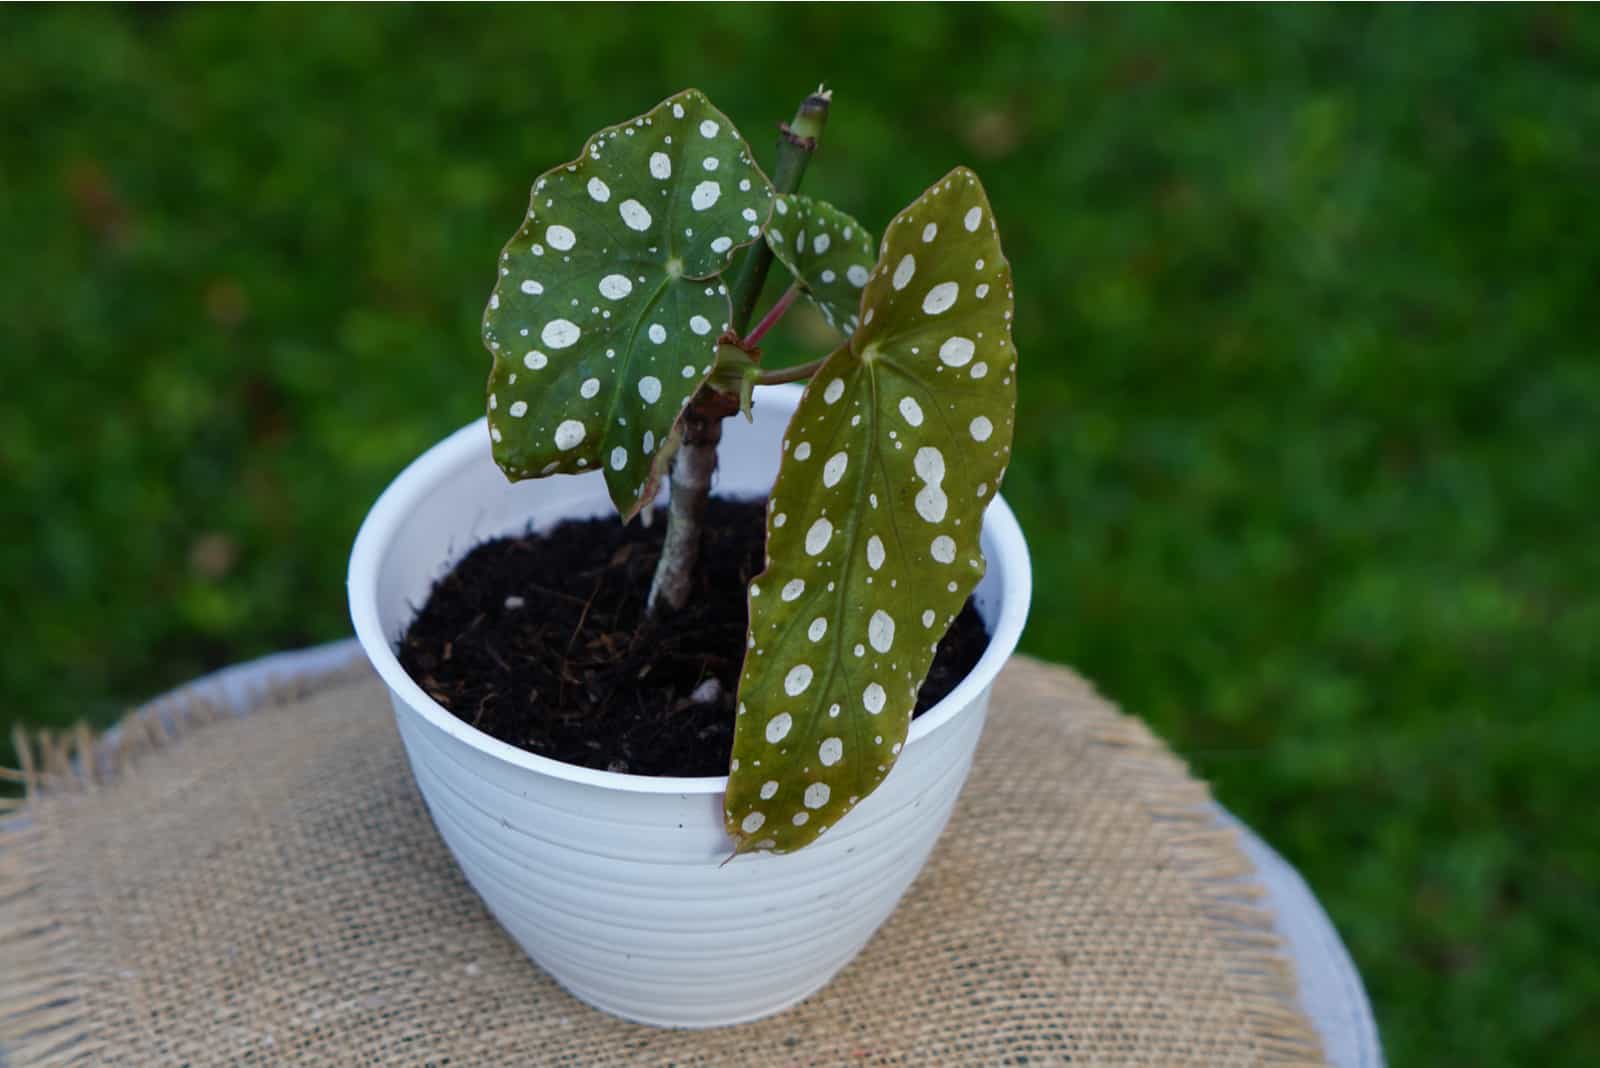 polka dot plant on the table outdoor